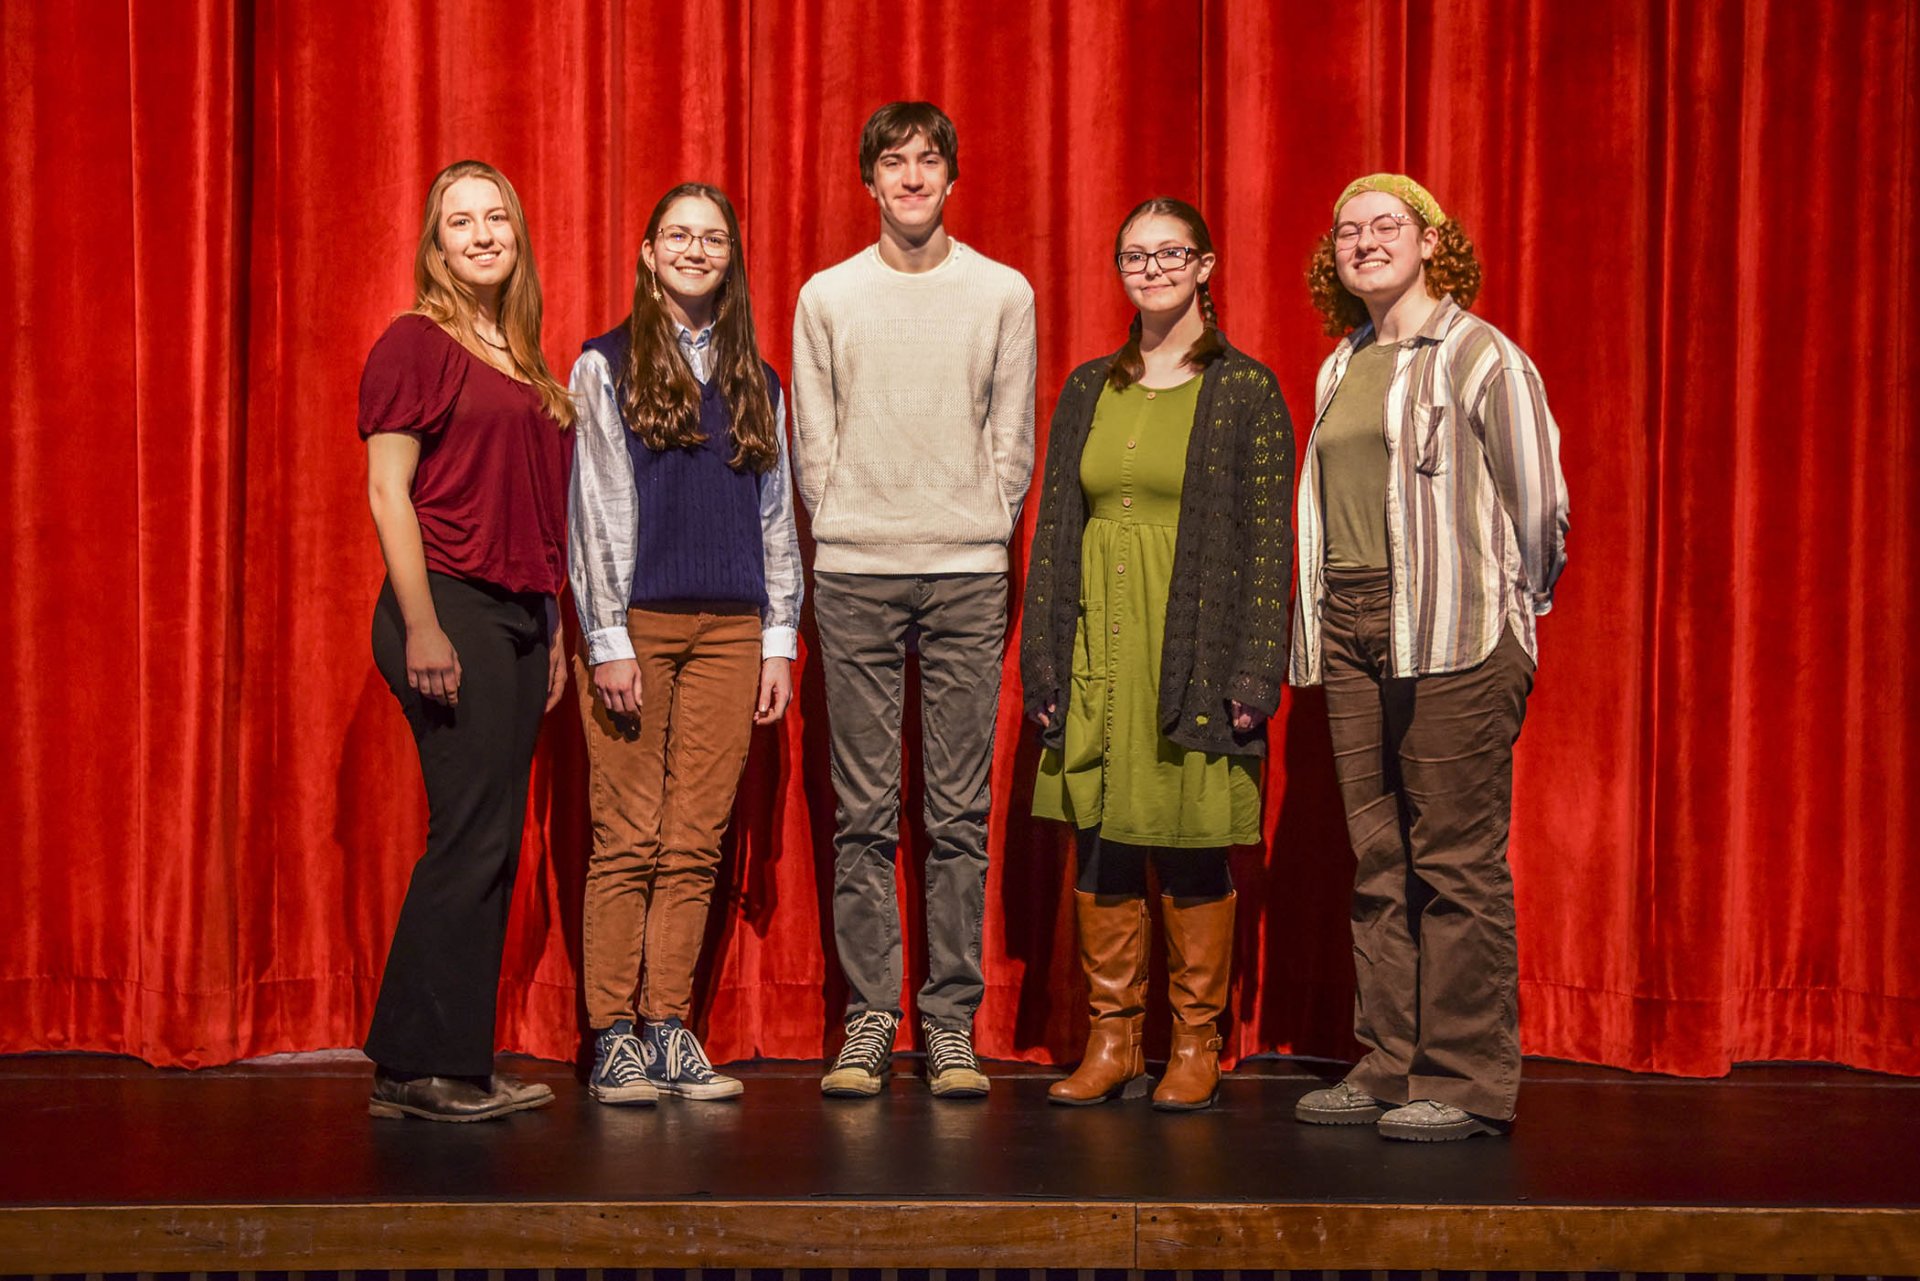 This year, six Lyndon Institute vocalists have been selected to attend the New England Music Festival hosted by Woodstock Academy in Woodstock, CT. The concert will be held on Saturday, March 25. Congratulations to (L to R) Grace Martin, Macey Mawhinney, Zane Mawhinney, Cassie Vanderhoof, Maida Stahler, and Alex Sirois (not pictured) for being selected for this year's concert festival.